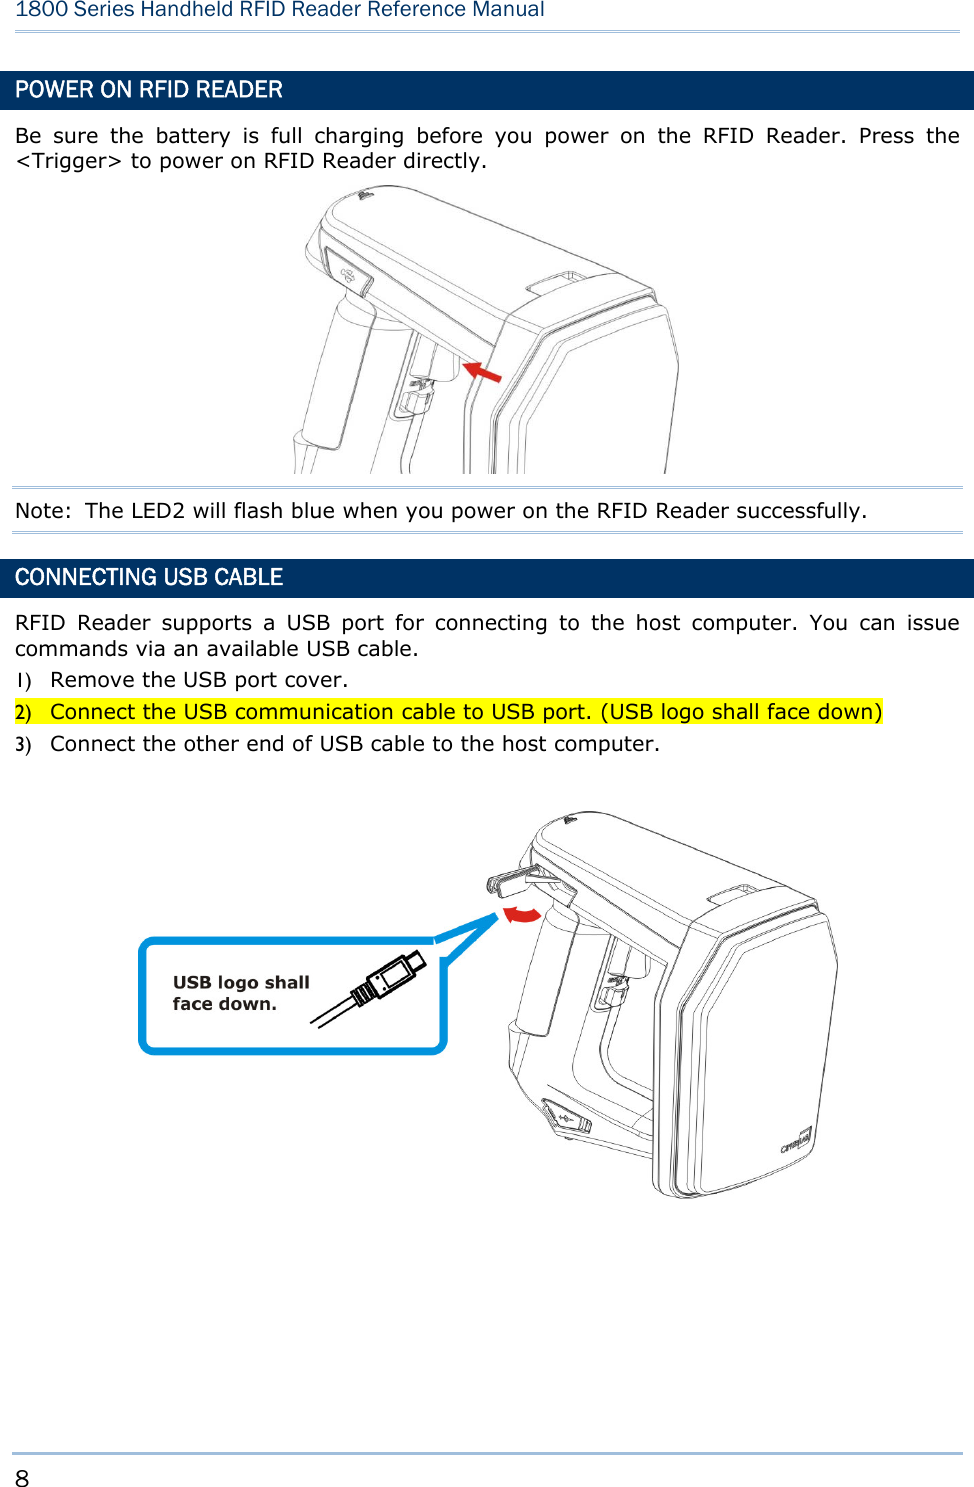 8  1800 Series Handheld RFID Reader Reference Manual  POWER ON RFID READER Be sure the battery is full charging before you power on the RFID Reader. Press the &lt;Trigger&gt; to power on RFID Reader directly.                             Note:  The LED2 will flash blue when you power on the RFID Reader successfully. CONNECTING USB CABLE RFID Reader supports a USB port for connecting to the host computer. You can issue commands via an available USB cable.   1) Remove the USB port cover. 2) Connect the USB communication cable to USB port. (USB logo shall face down) 3) Connect the other end of USB cable to the host computer.          